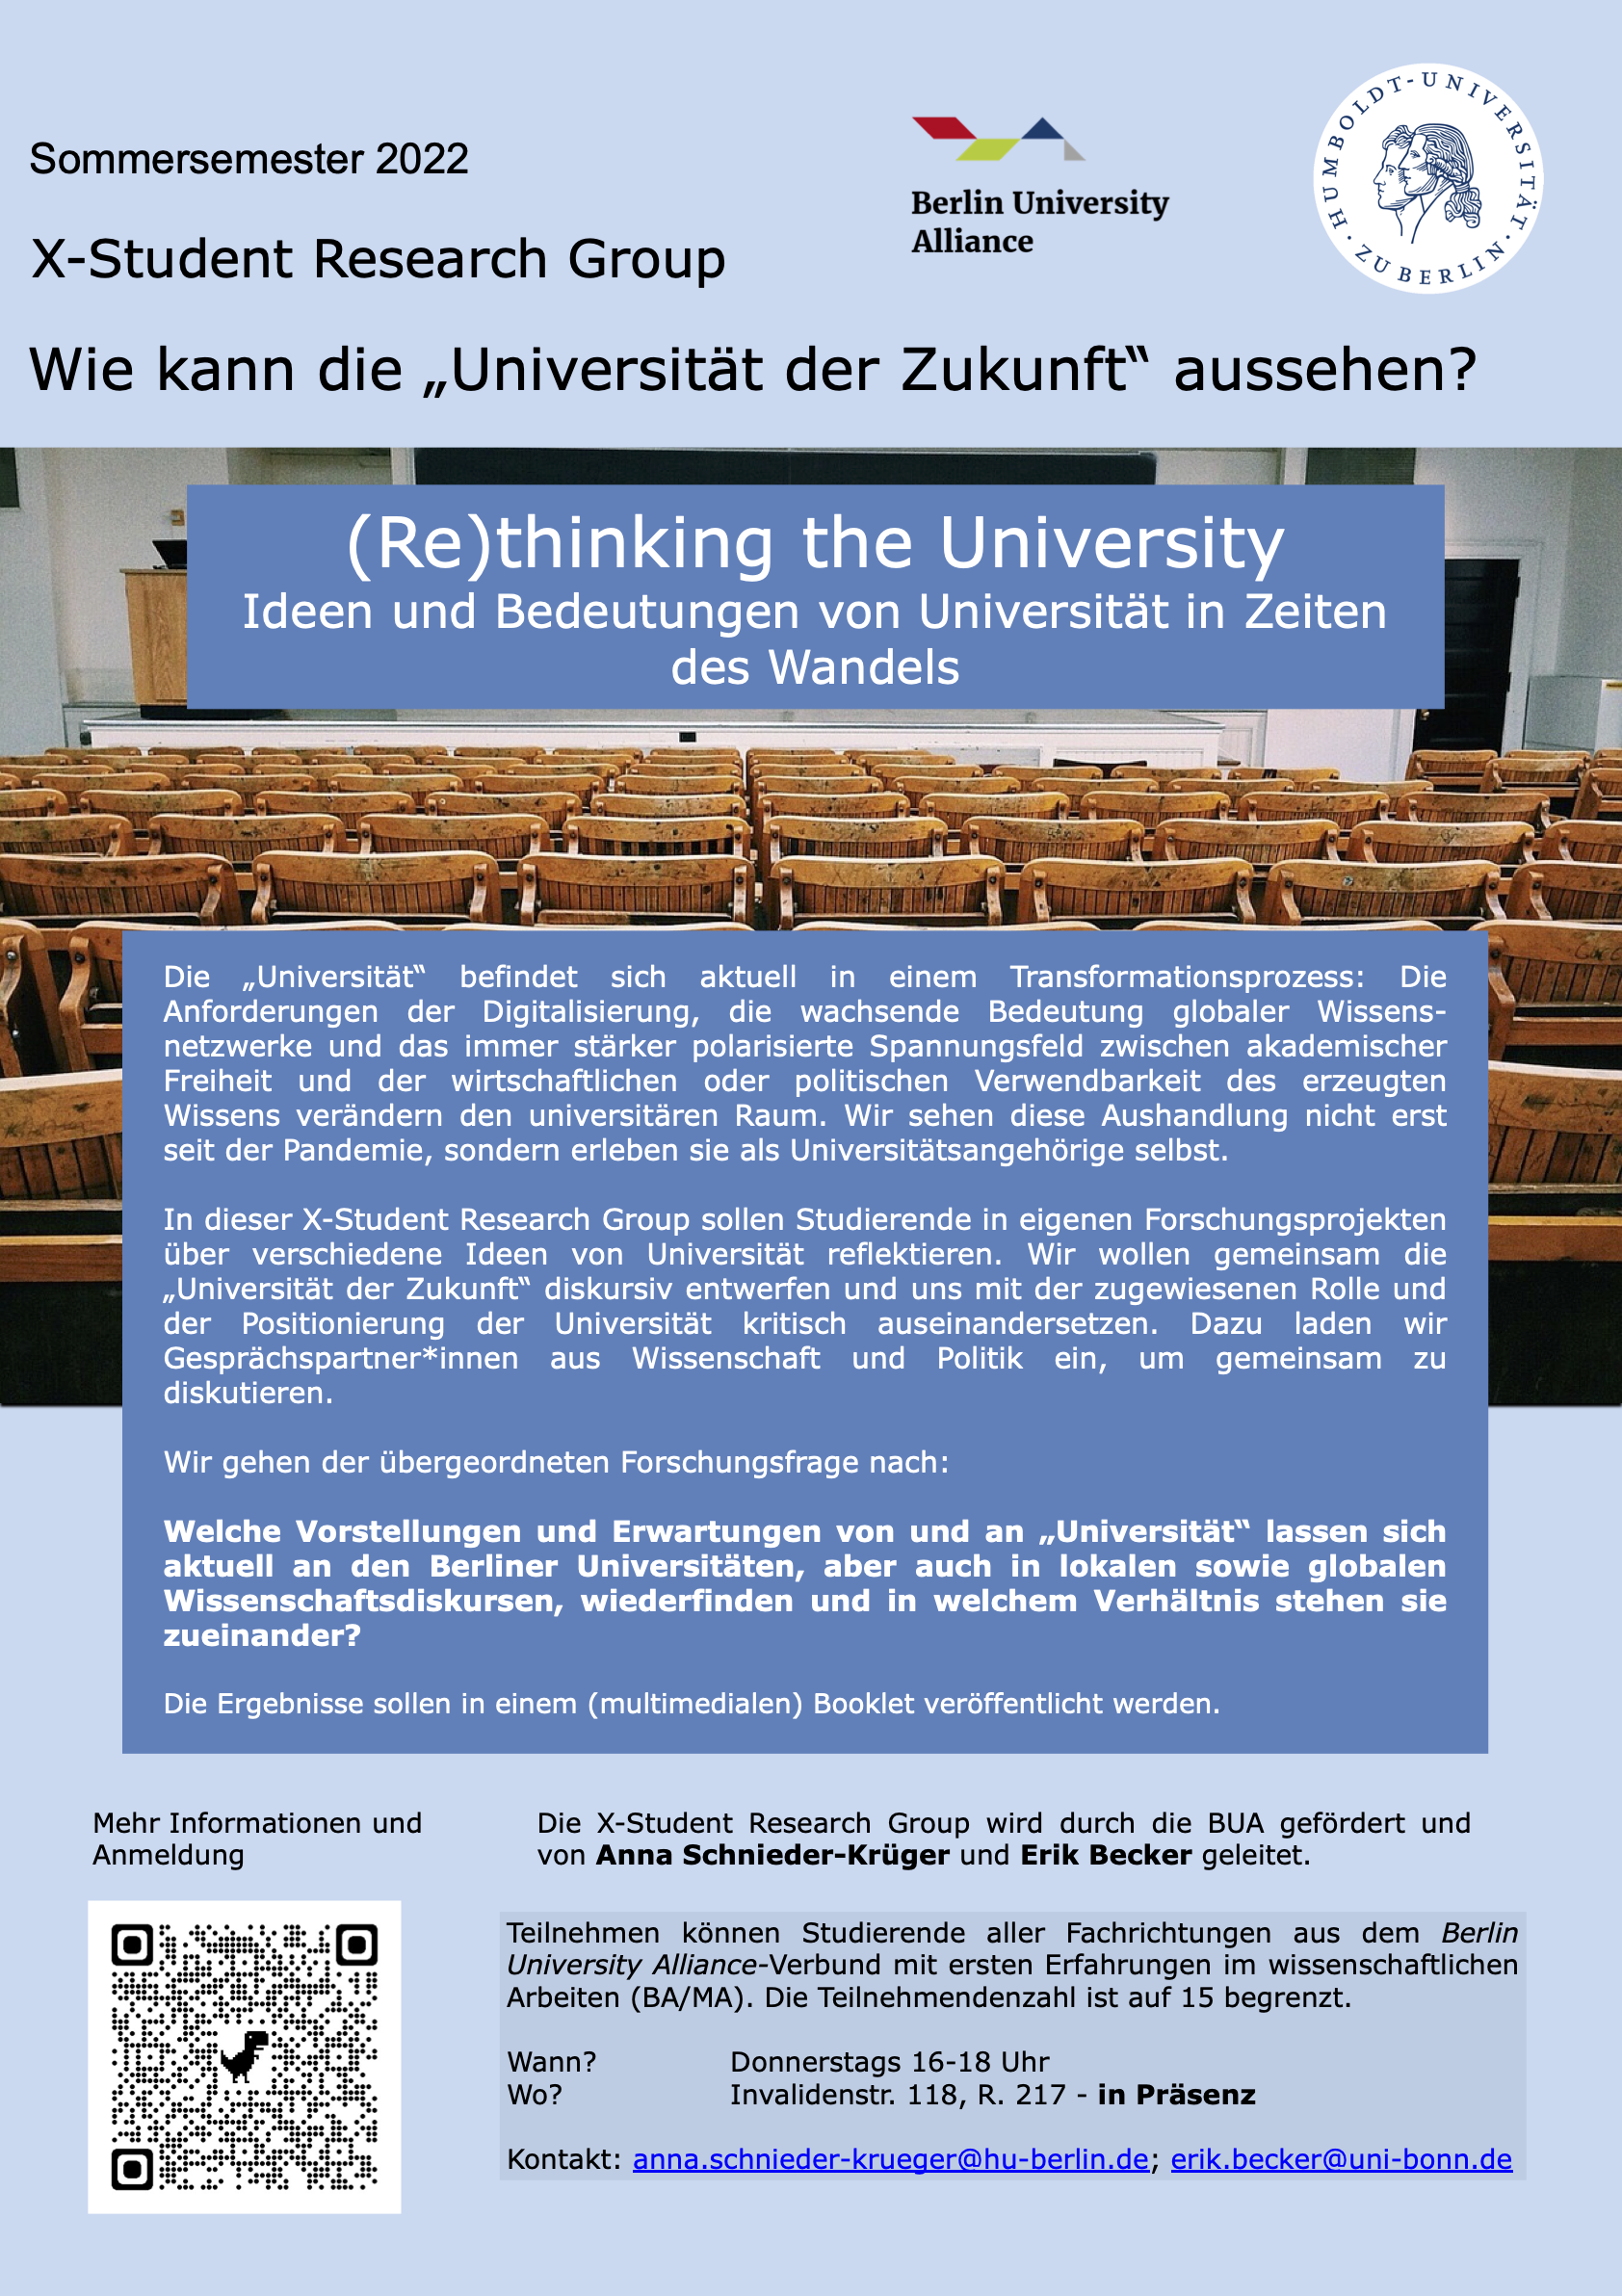 POSTER_(Re)thinking the University_AnkuendigungsPoster_ASK_EB-4.png